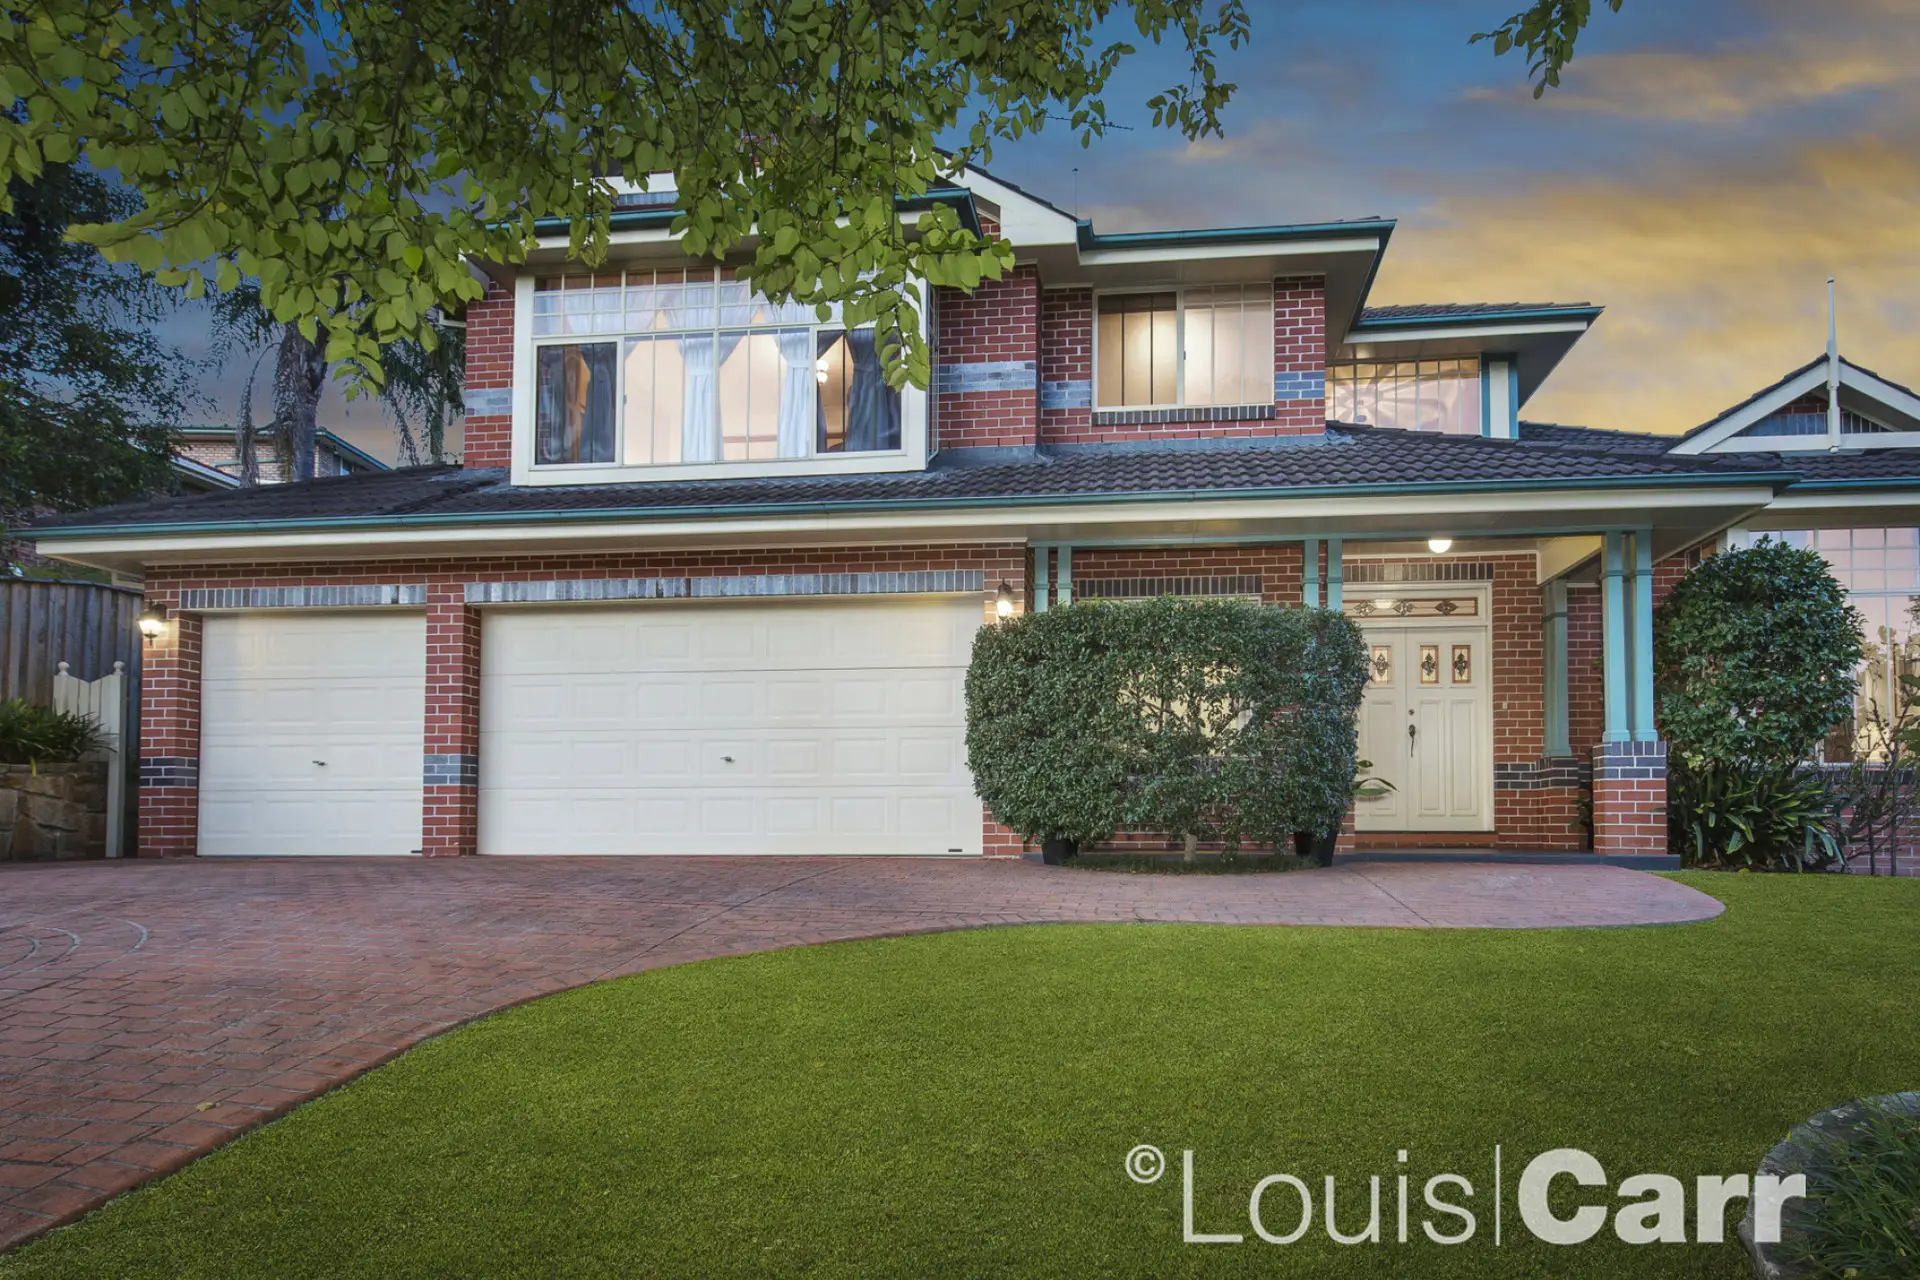 Photo #1: 5 Redwood Close, Castle Hill - Sold by Louis Carr Real Estate